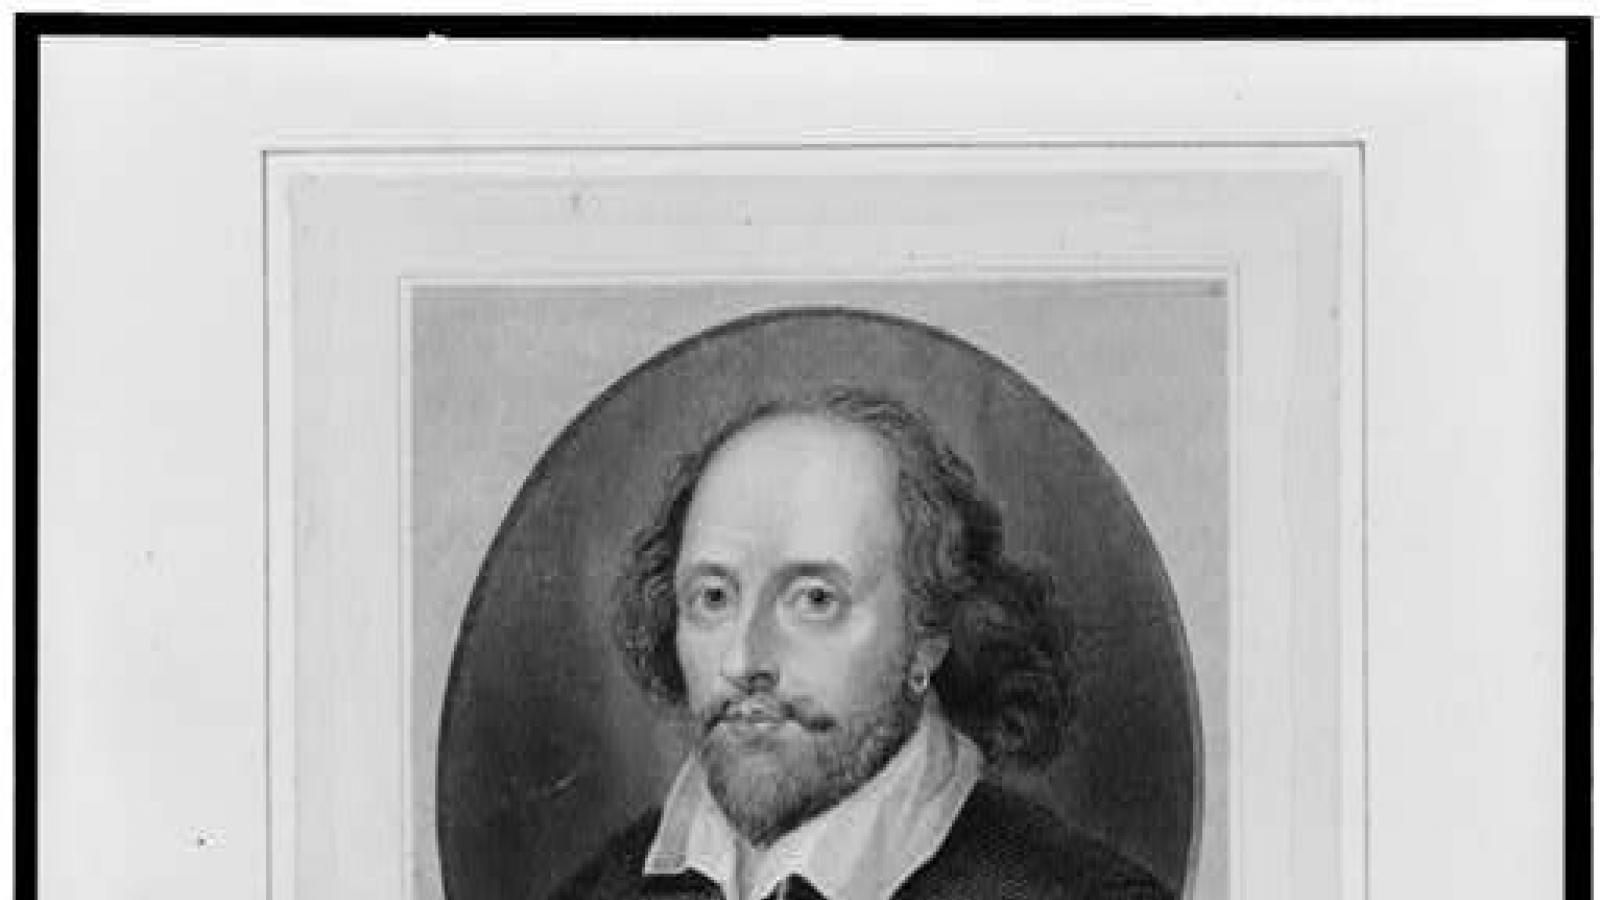 William Shakespeare / engraved by Benjamin Holl from the print by Houbraken. From Library of Congress collection